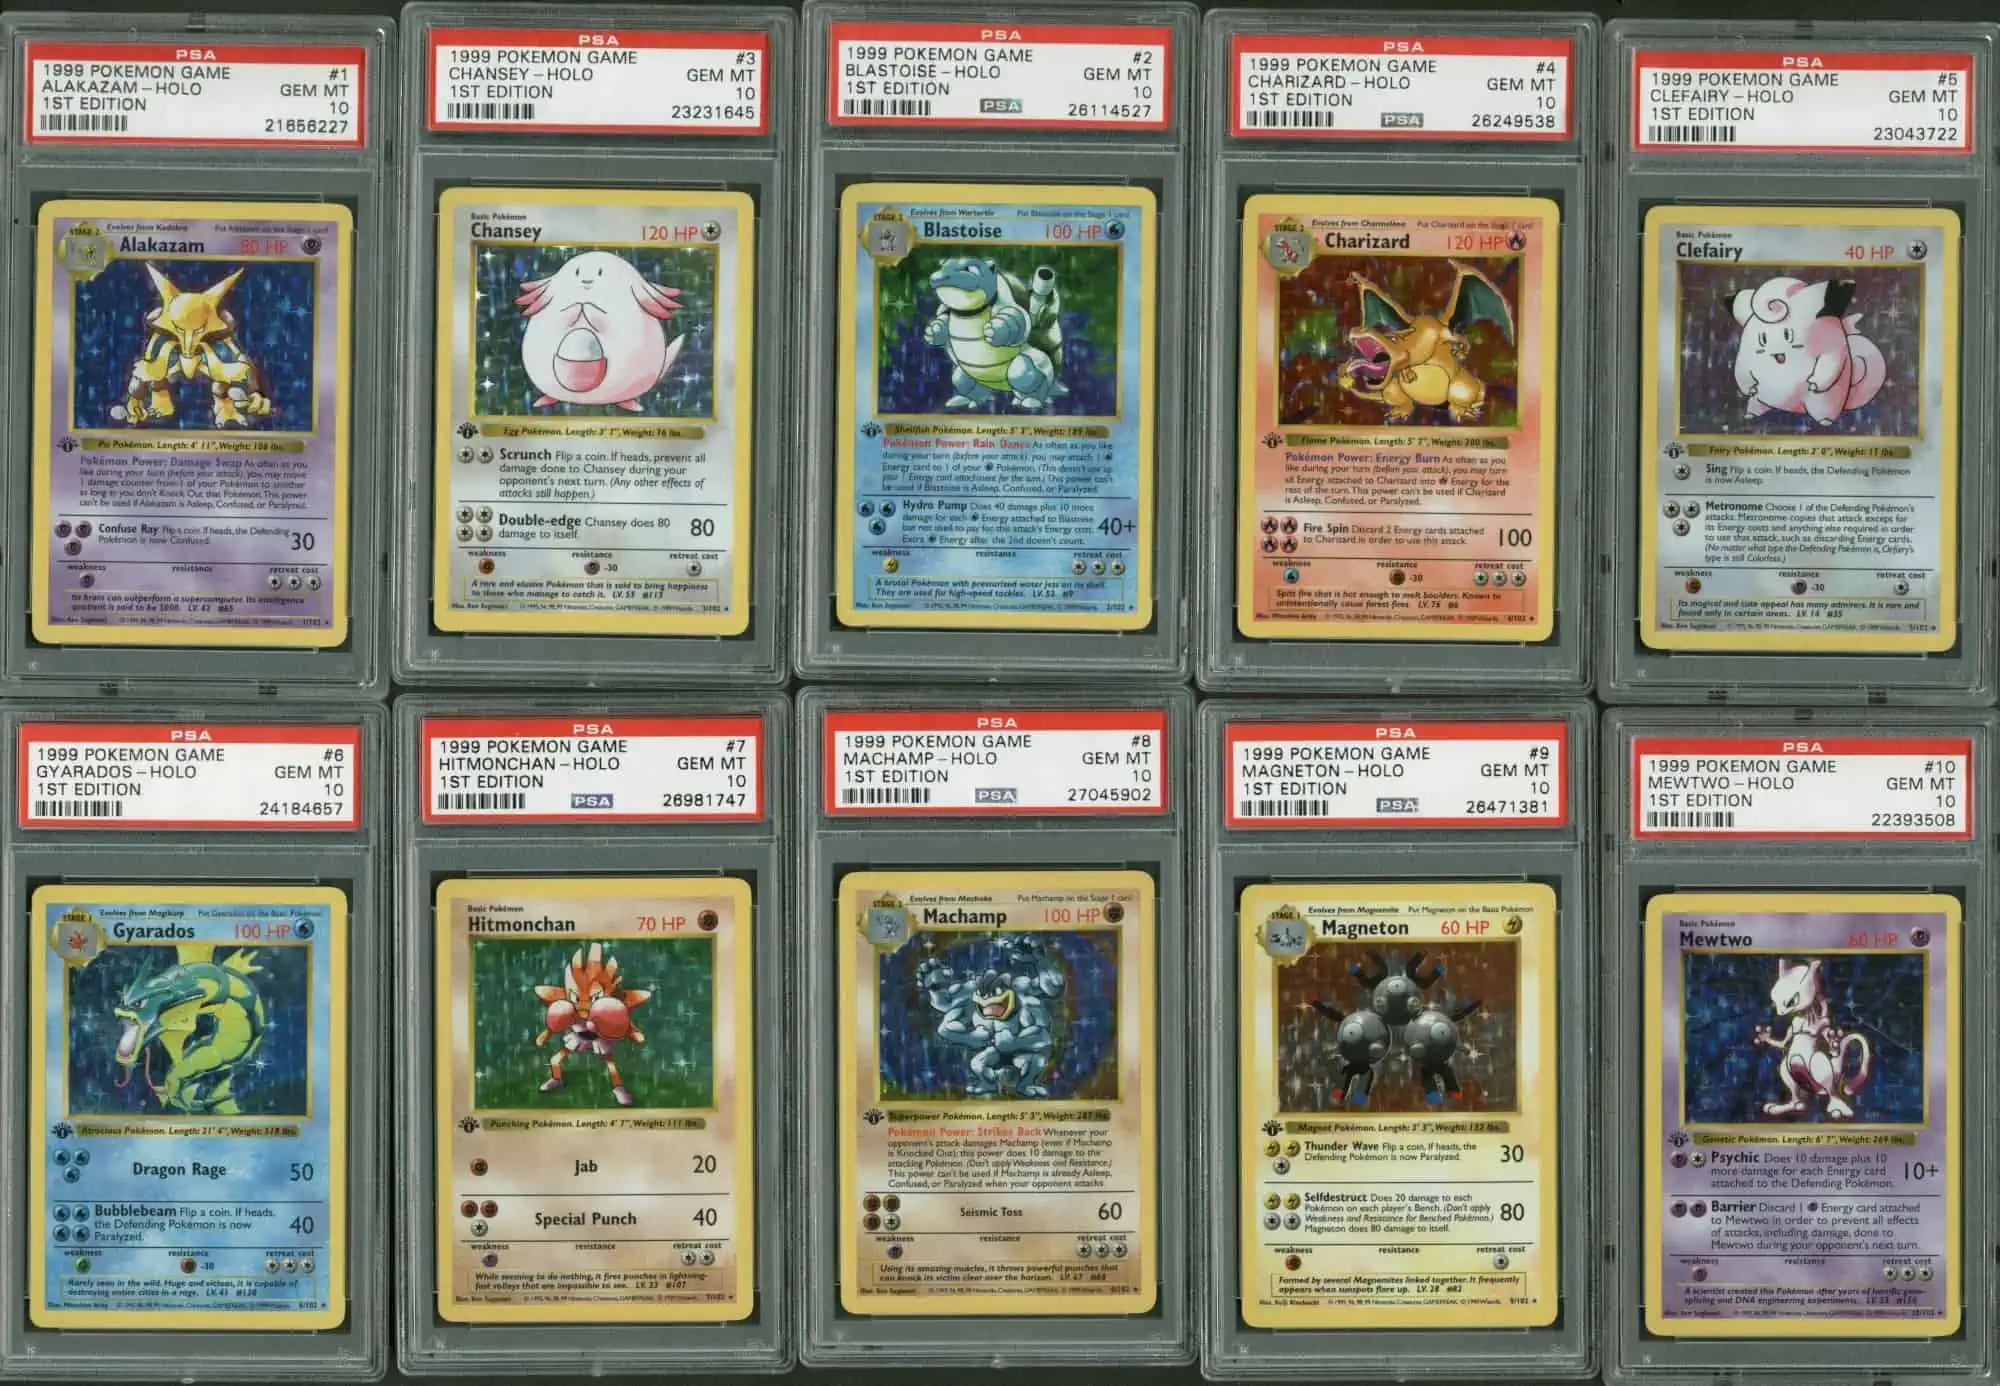 Investing in collectibles: PSA graded Pokemon trading cards.